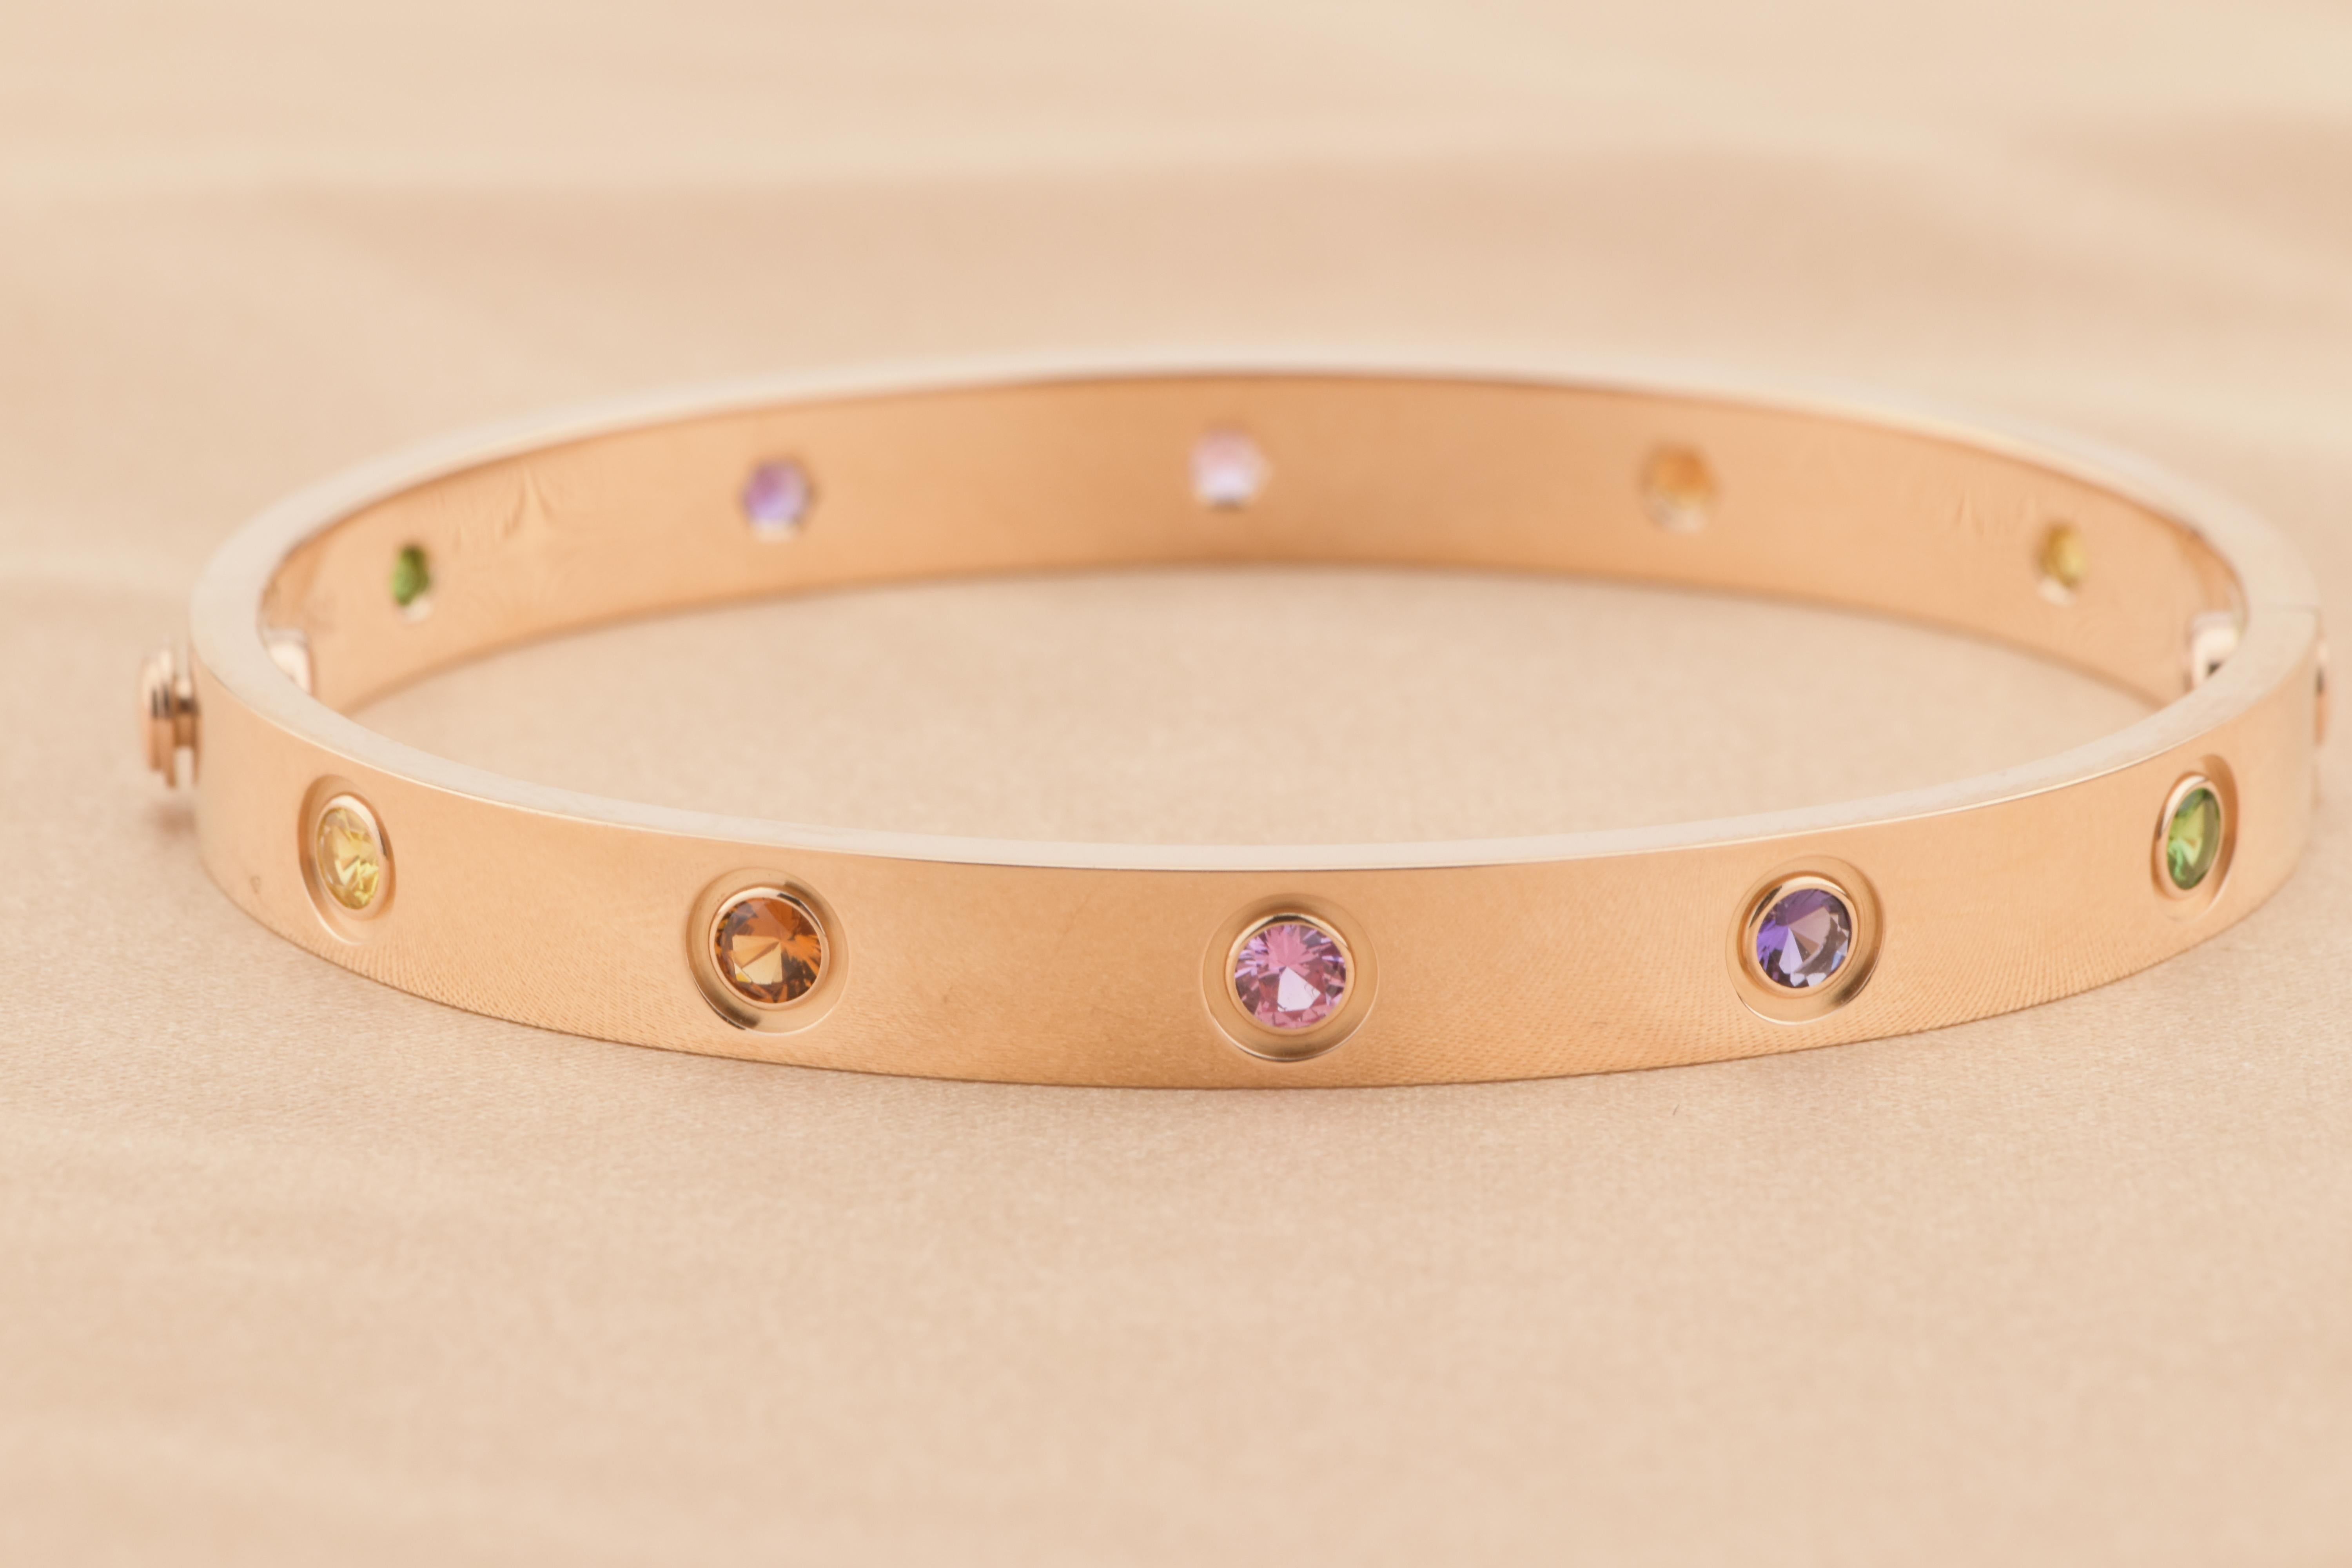 LOVE bracelet, 18K rose gold, set with 2 pink sapphires, 2 yellow sapphires, 2 green garnets, 2 orange garnets, and 2 amethysts. 
Comes with Cartier Box / Dandelion Antiques Guarantee Card. Size 16
__________________________________

Dandelion